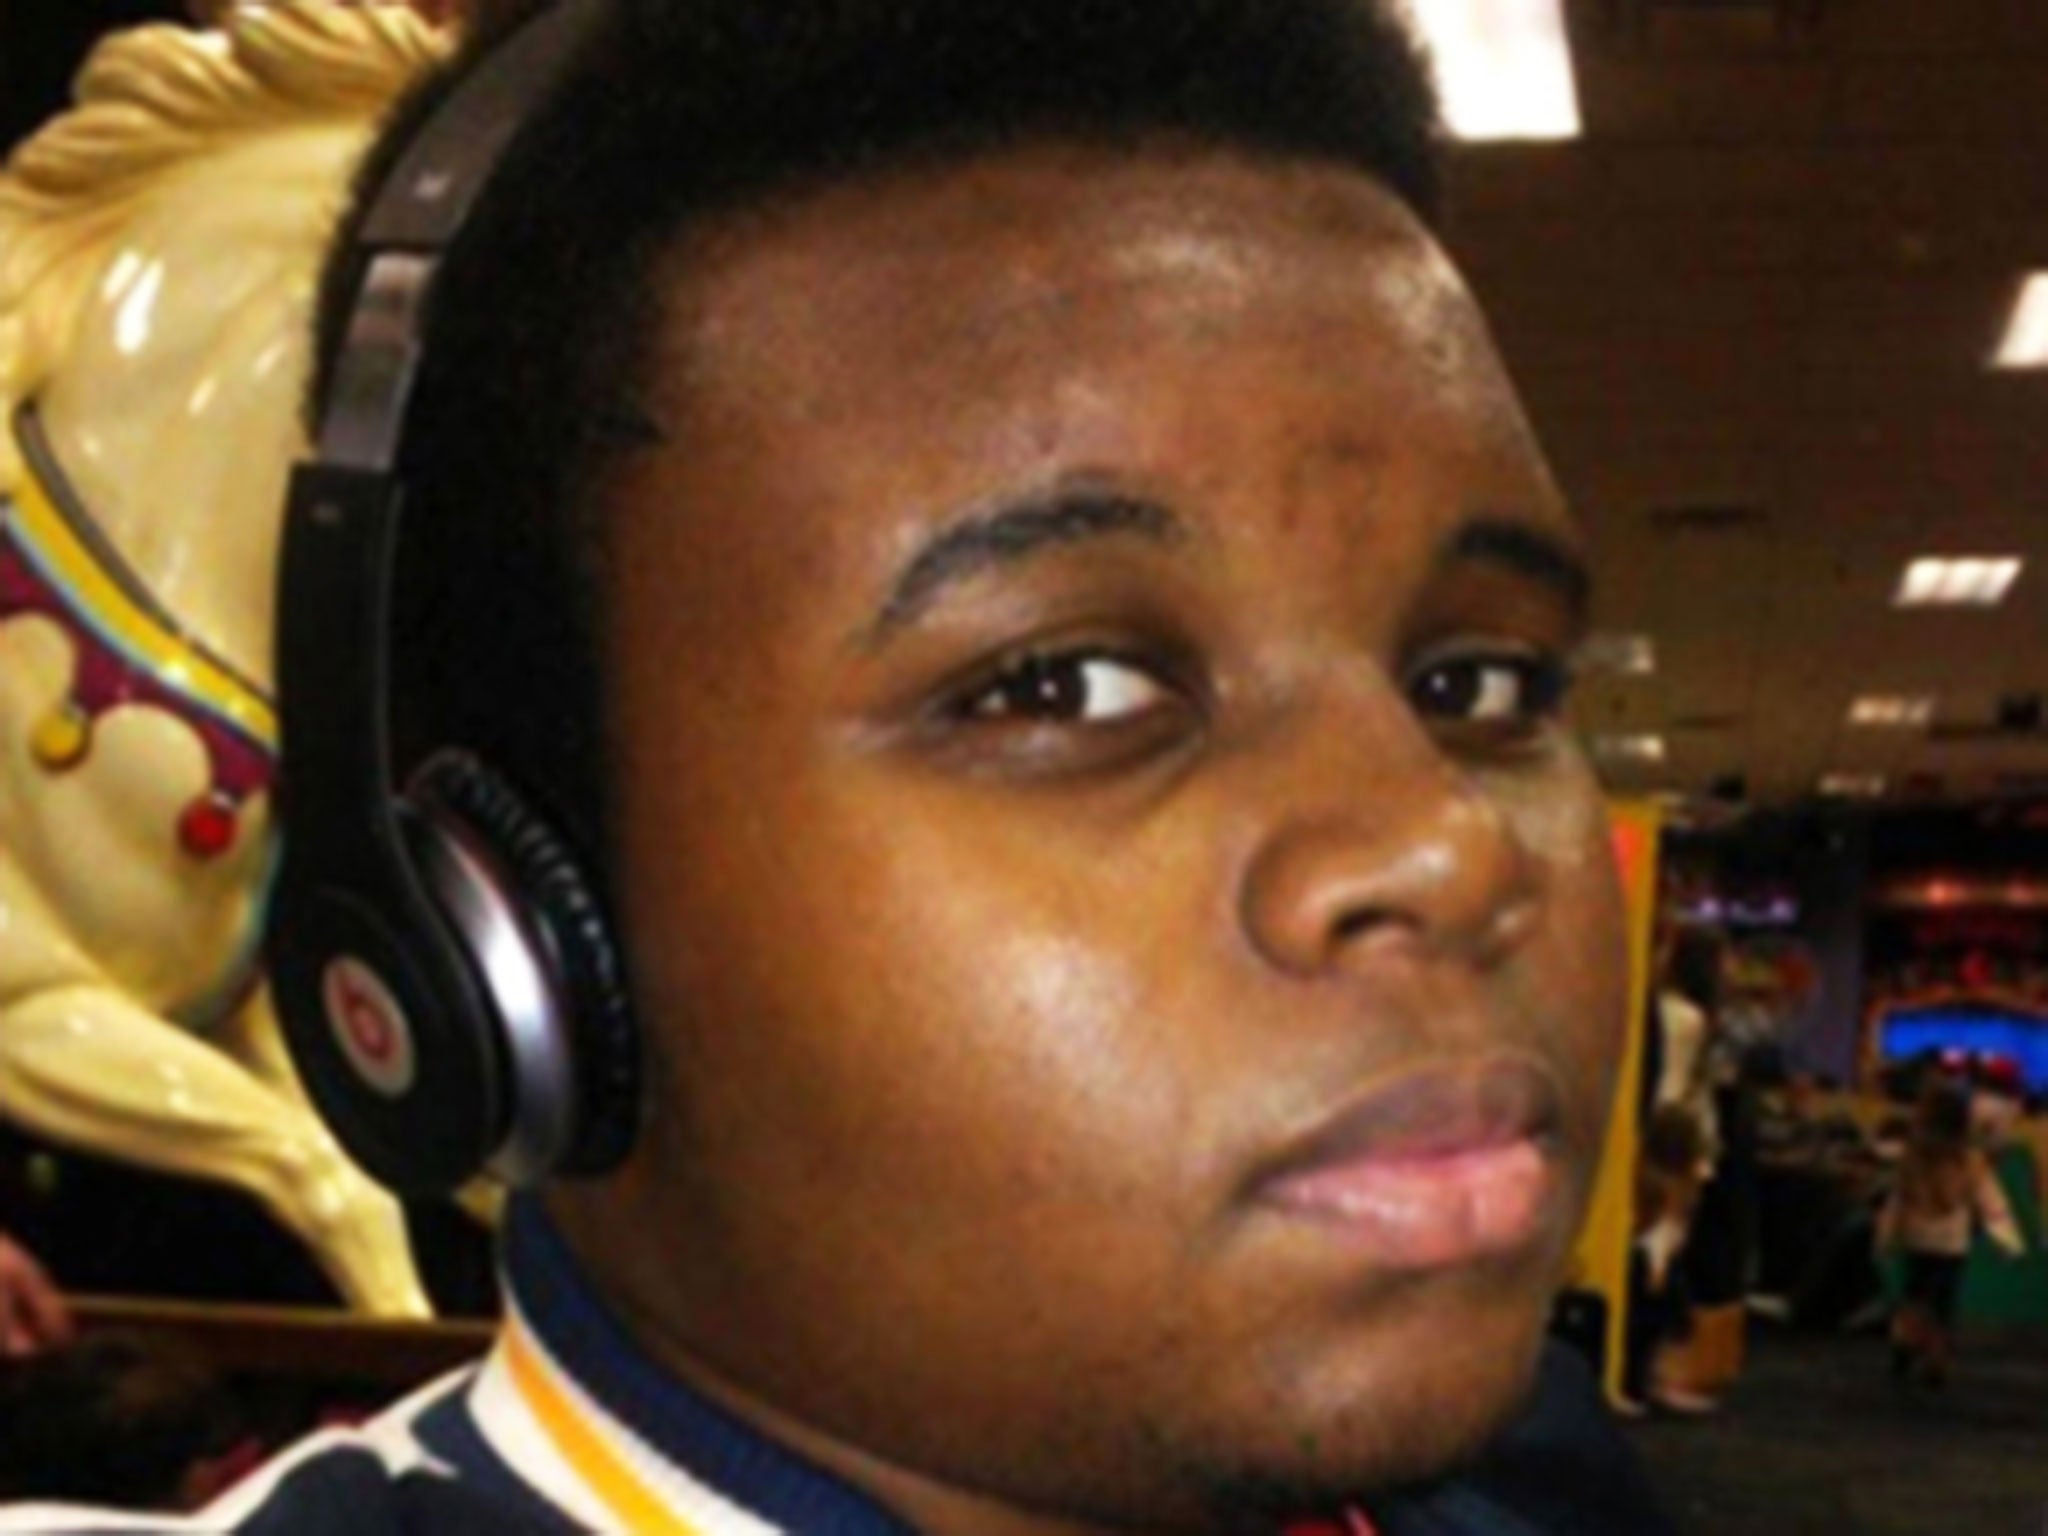 Teenager Michael Brown was shot dead by a white police officer last year